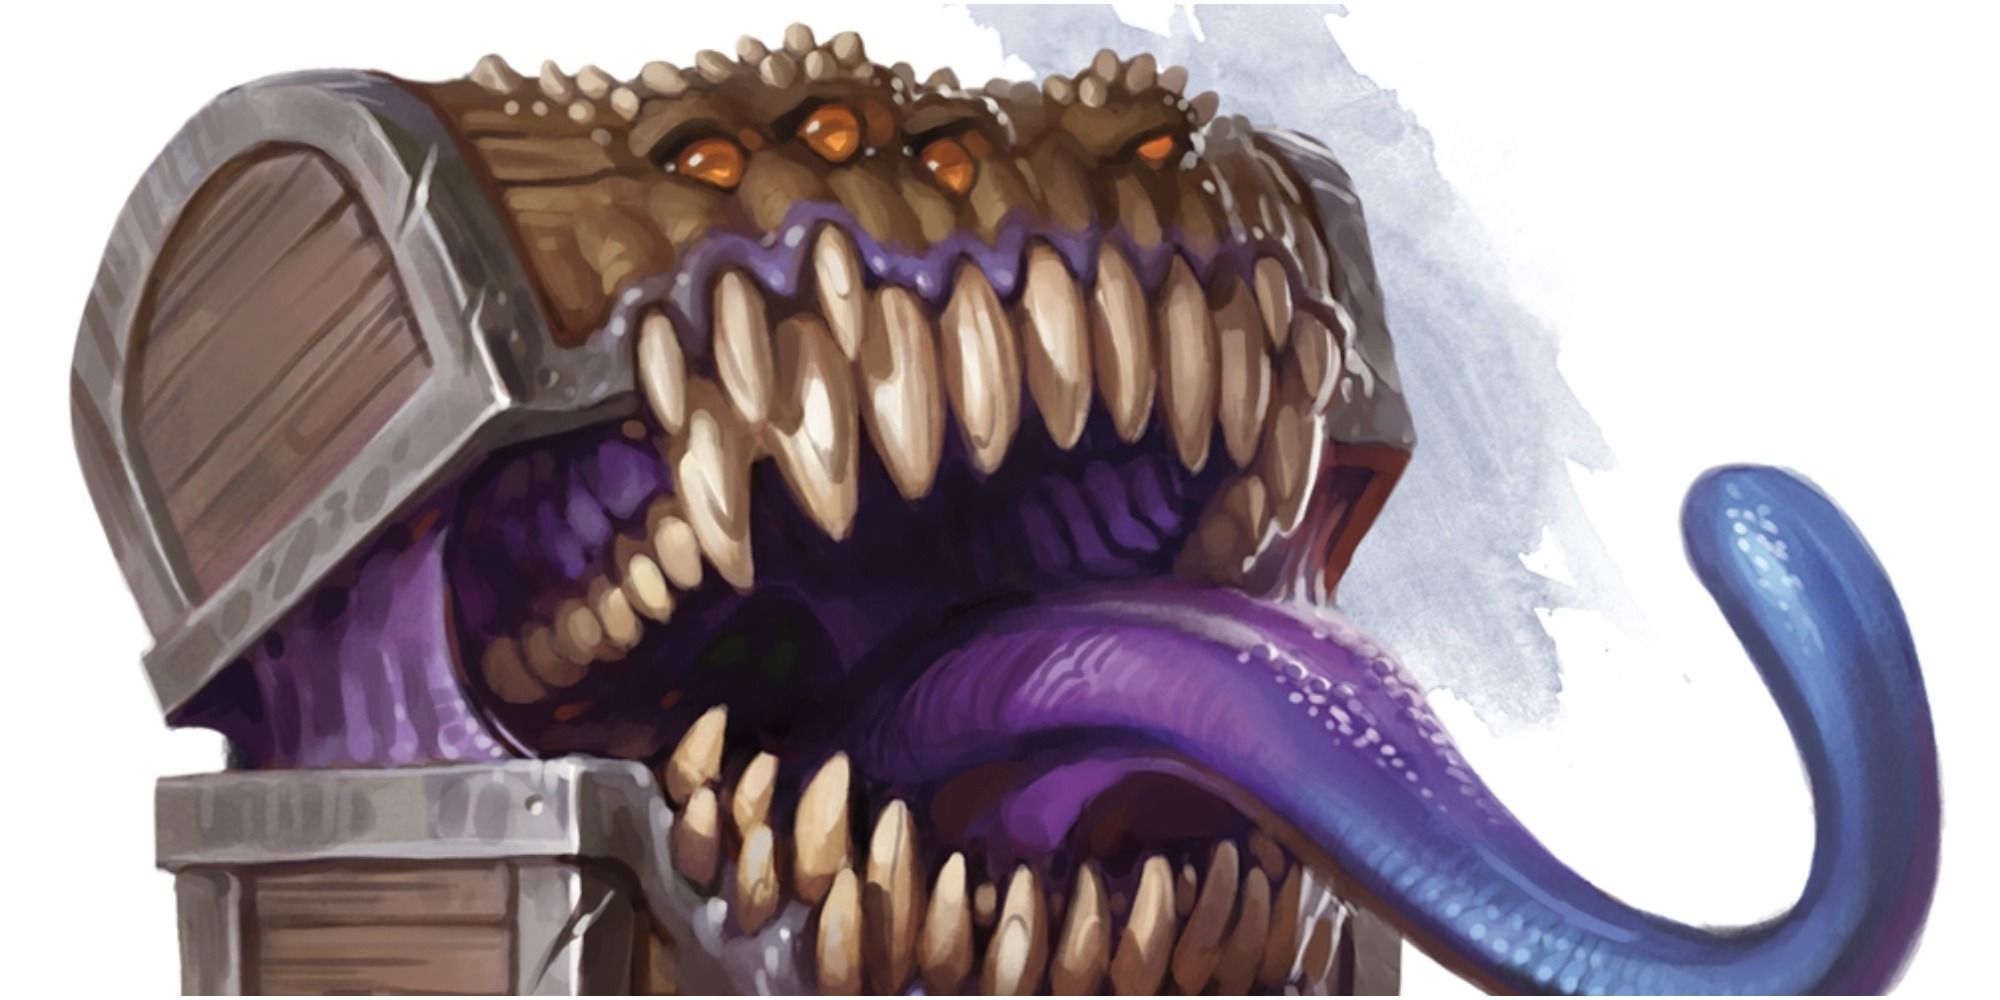 mimic artwork from dungeons & dragons